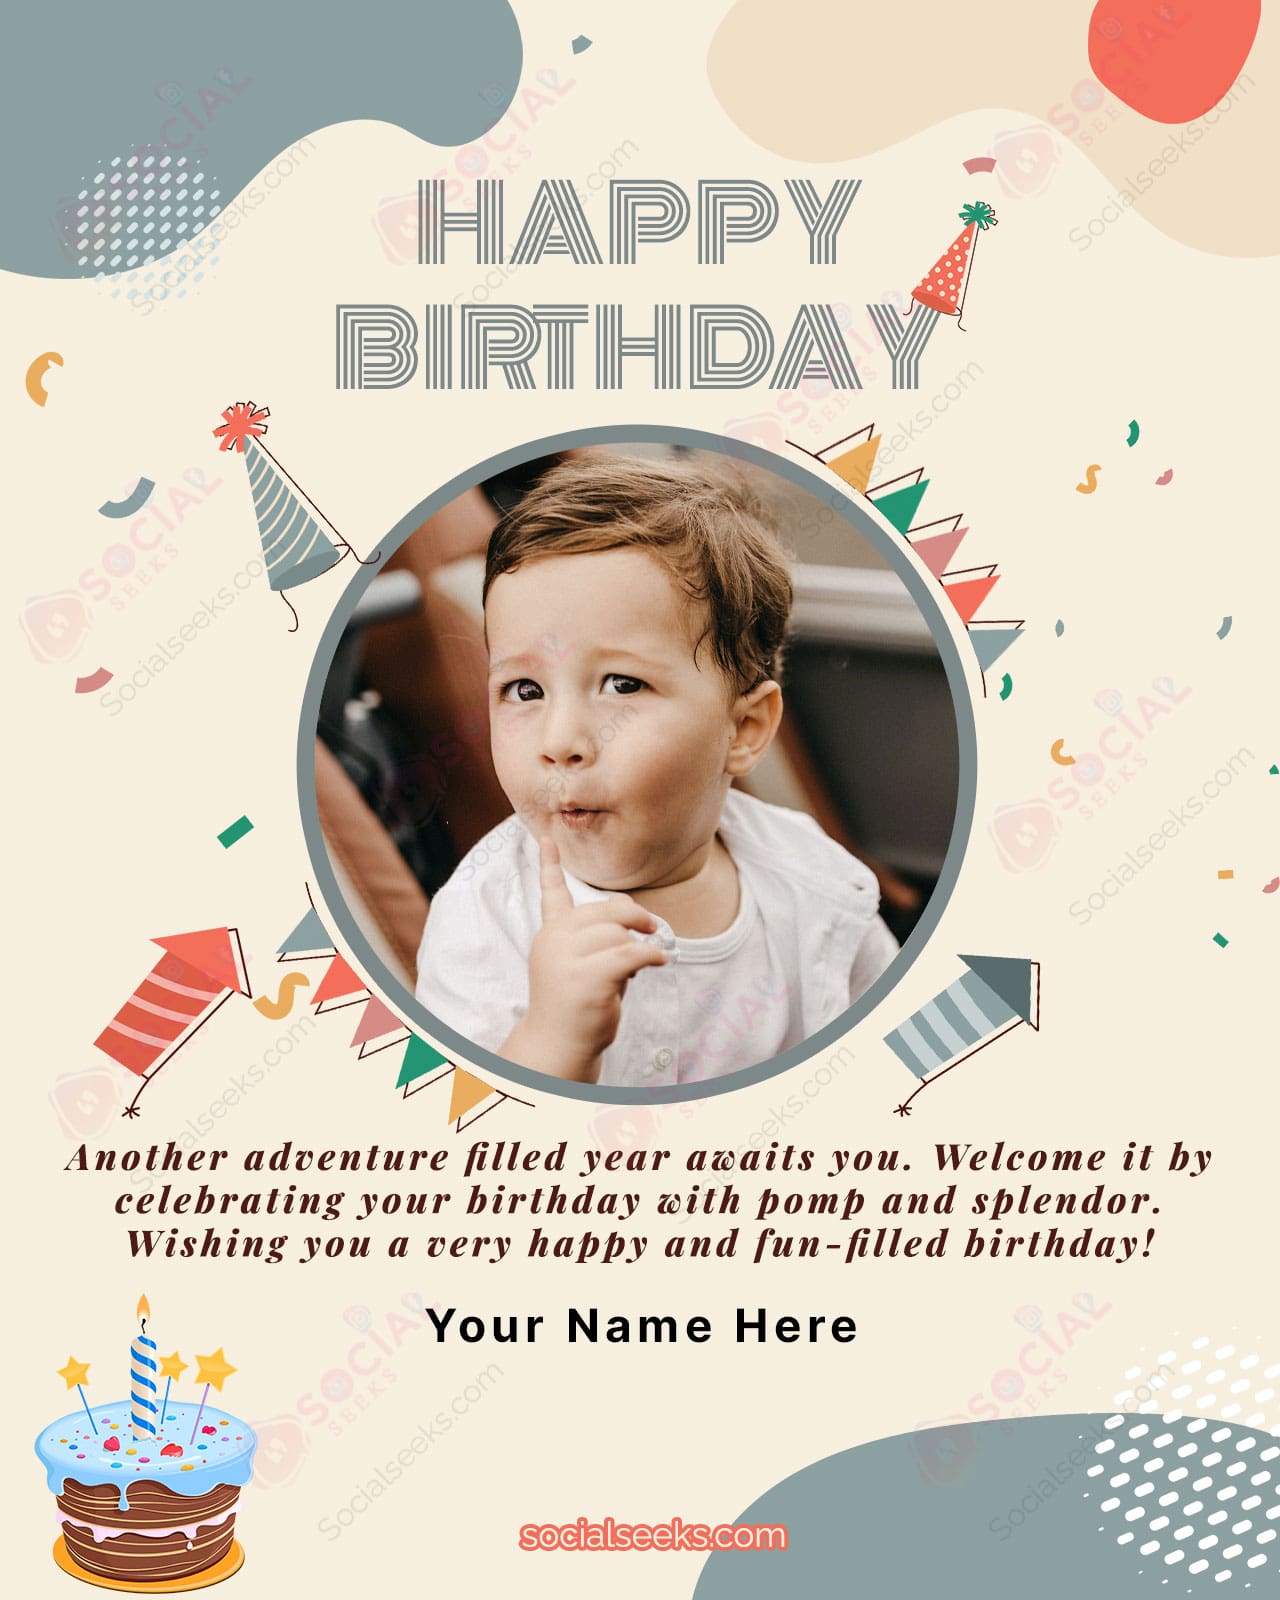 Simple Happy Birthday Wishing Photo Frame With Name